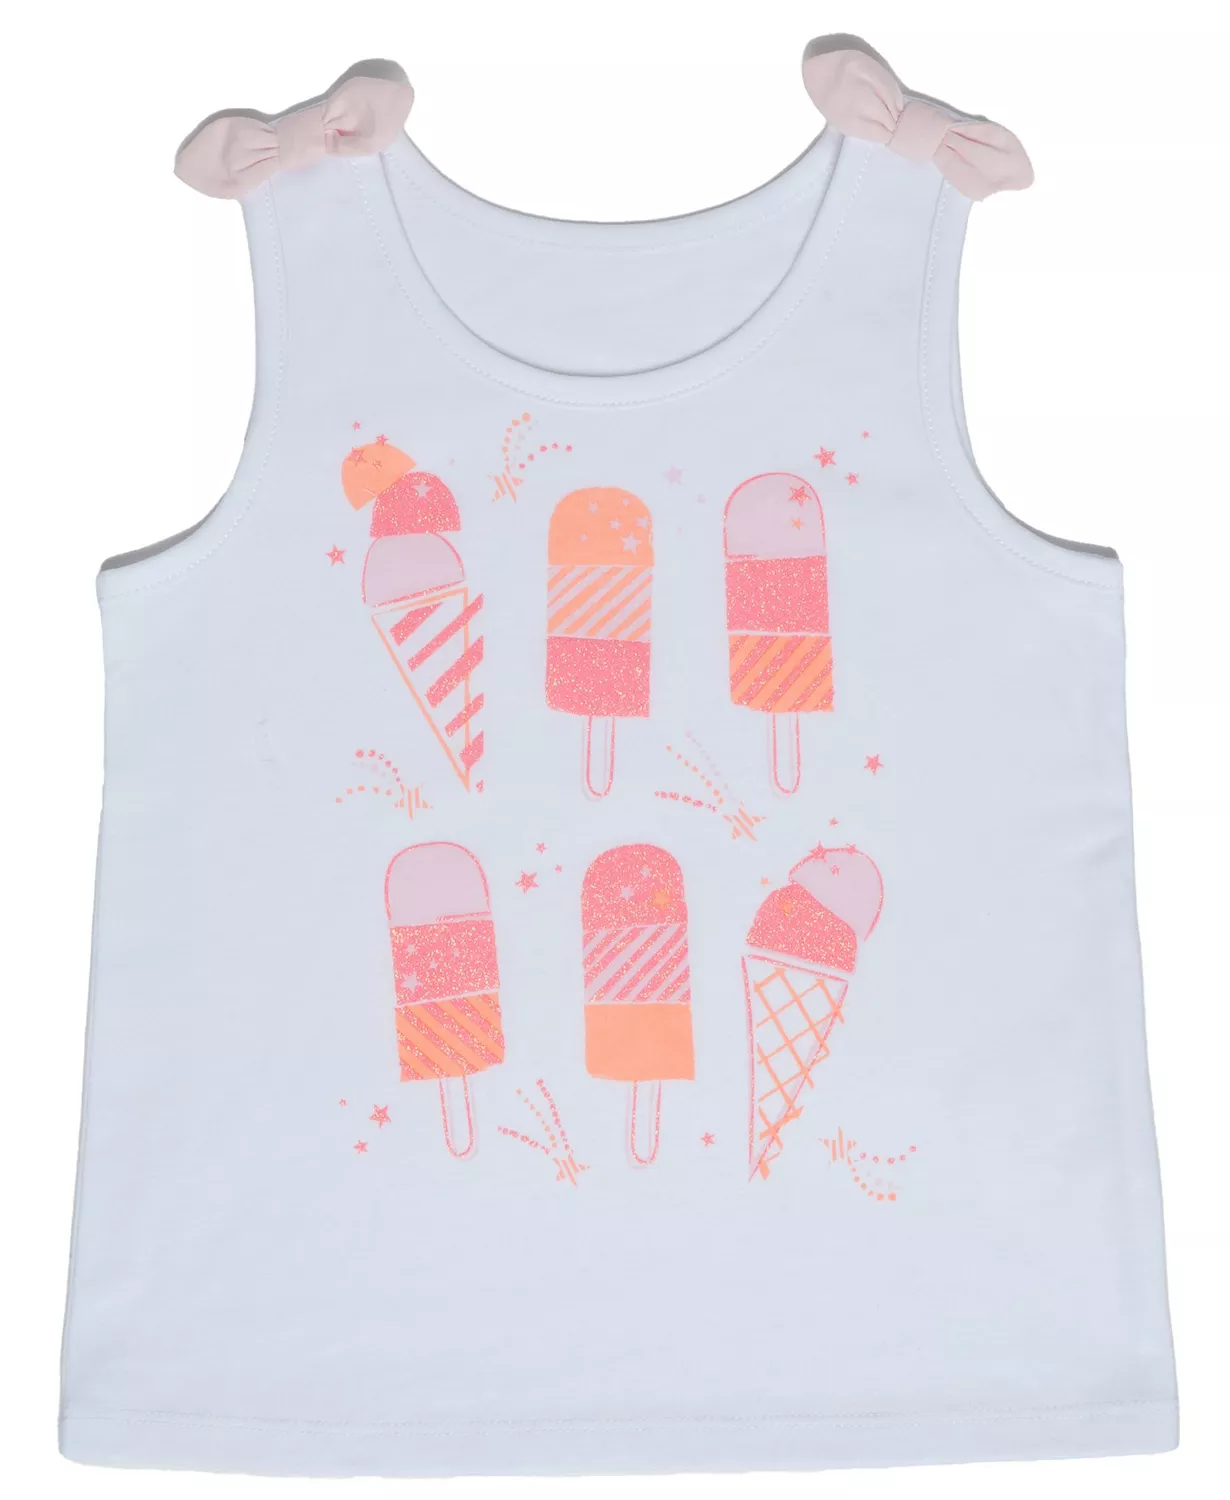 17536035 fpx - Girls Tank Tops at Macys for $3.16